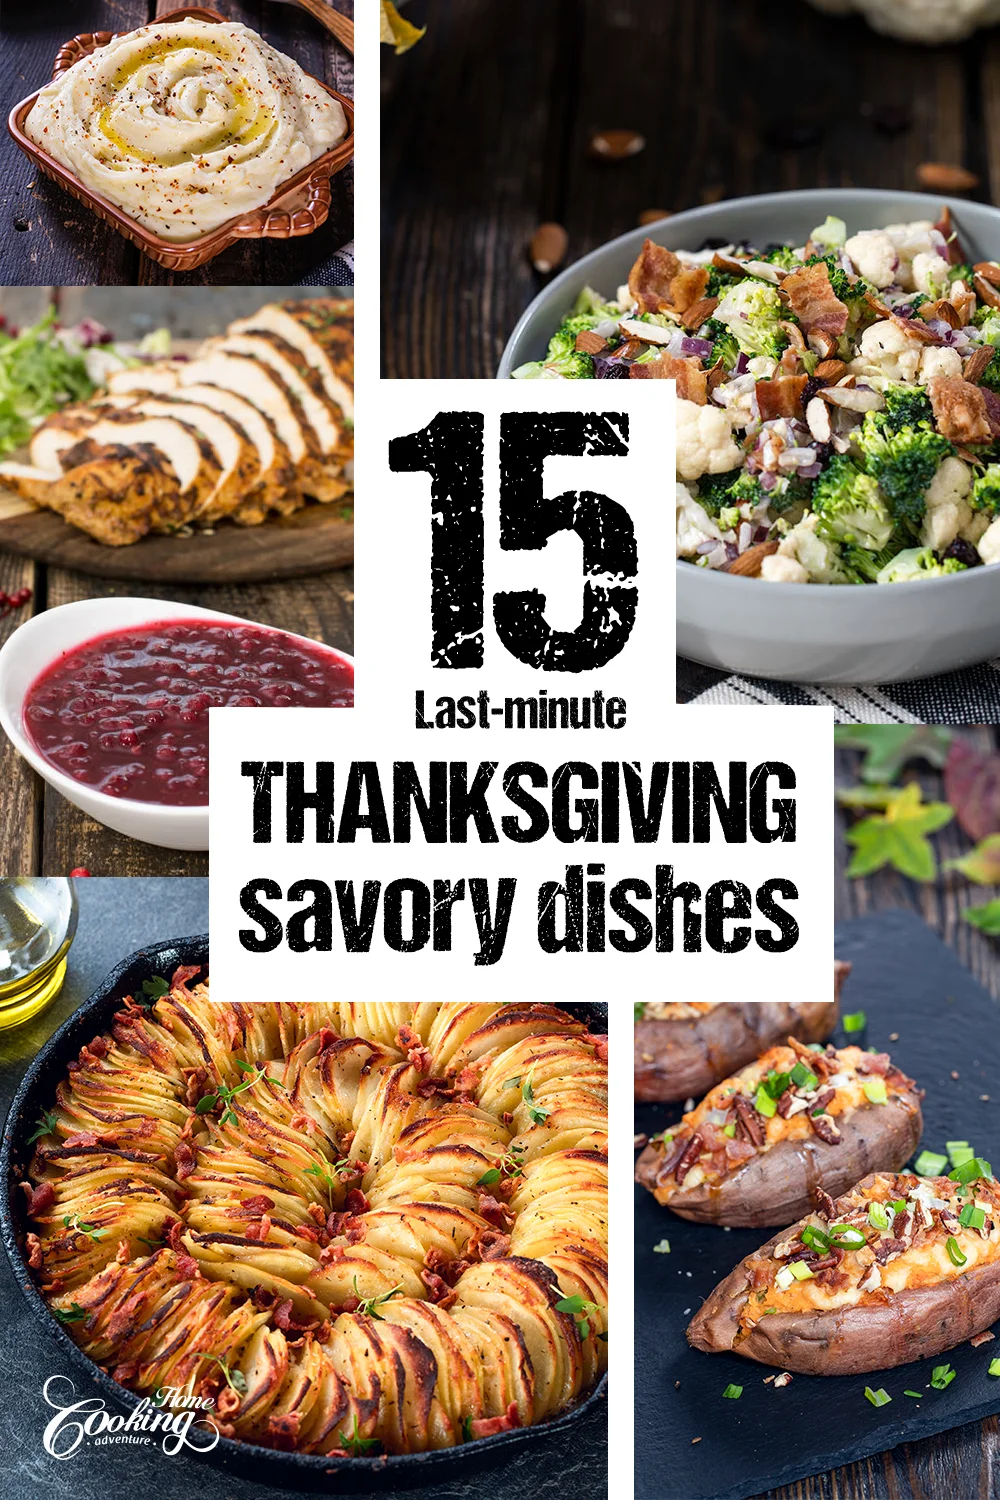 15 last-minute Thanksgiving side dishes